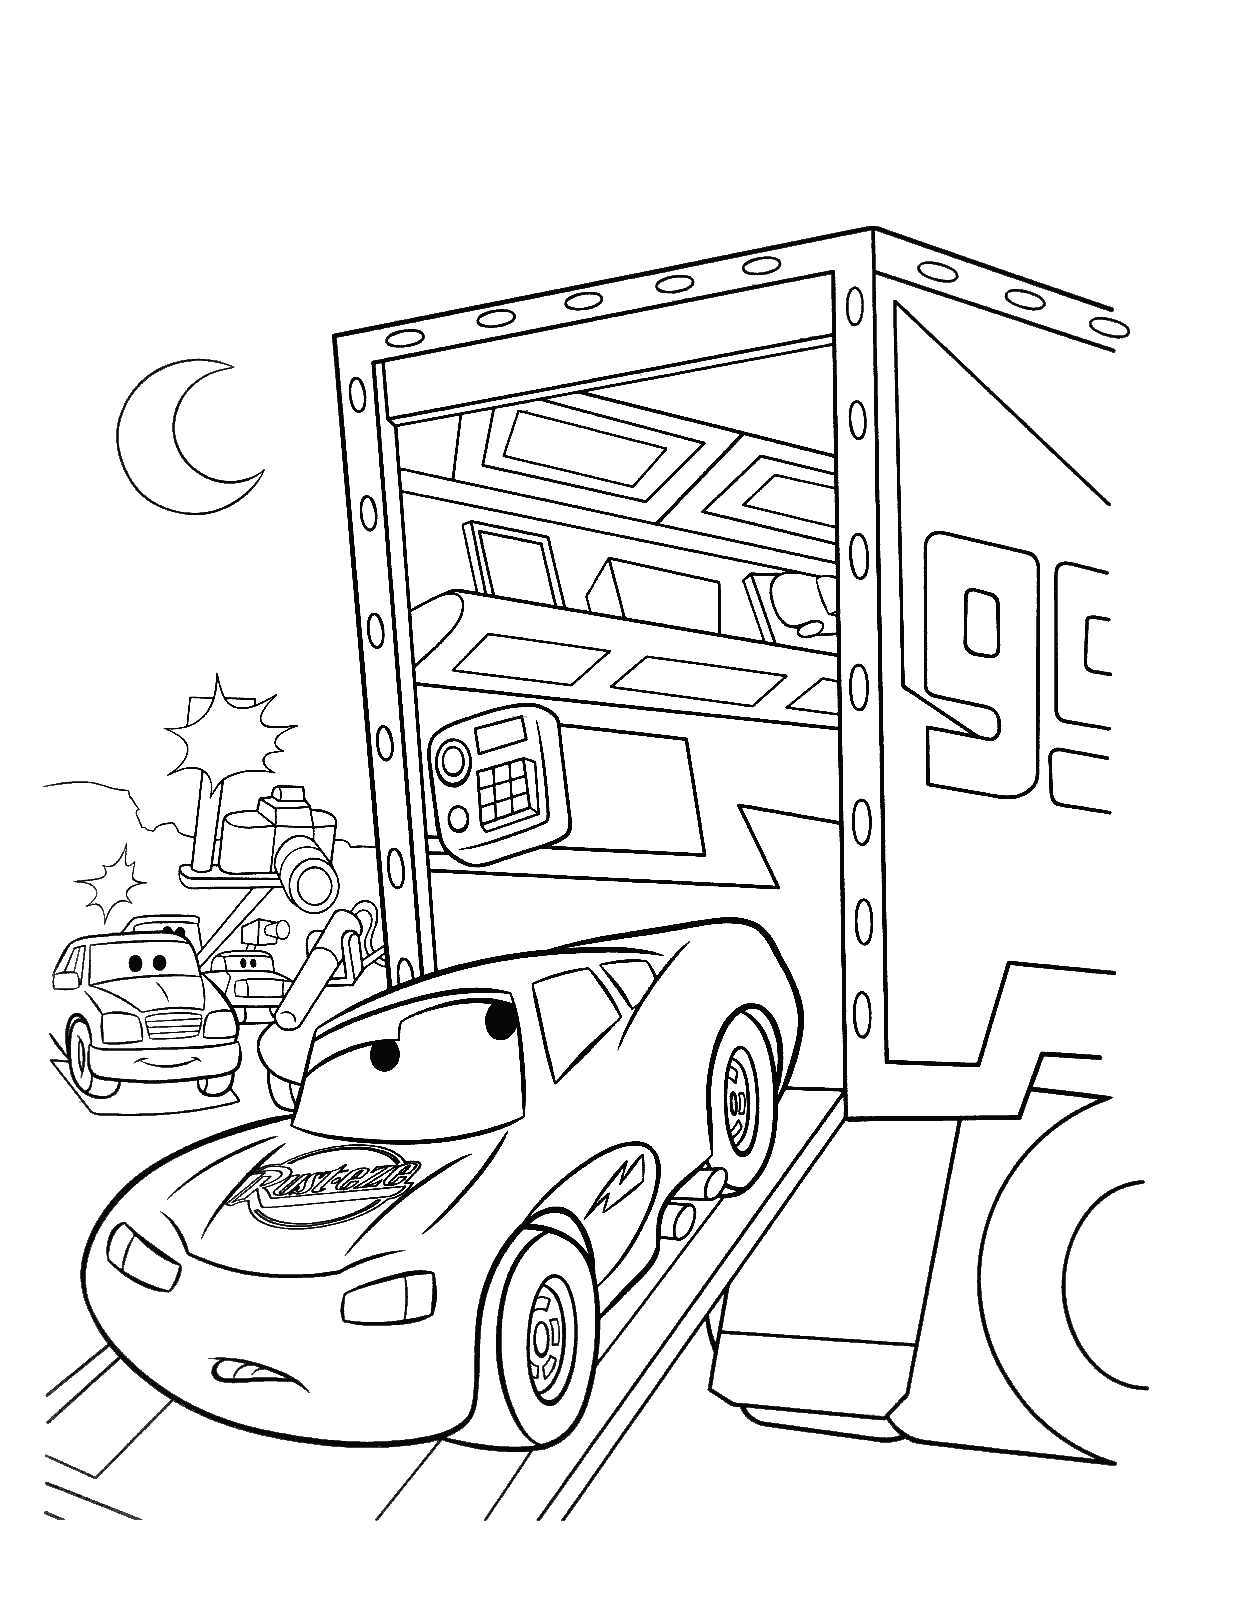 Car Coloring Page Easy 68 Svg File For Diy Machine